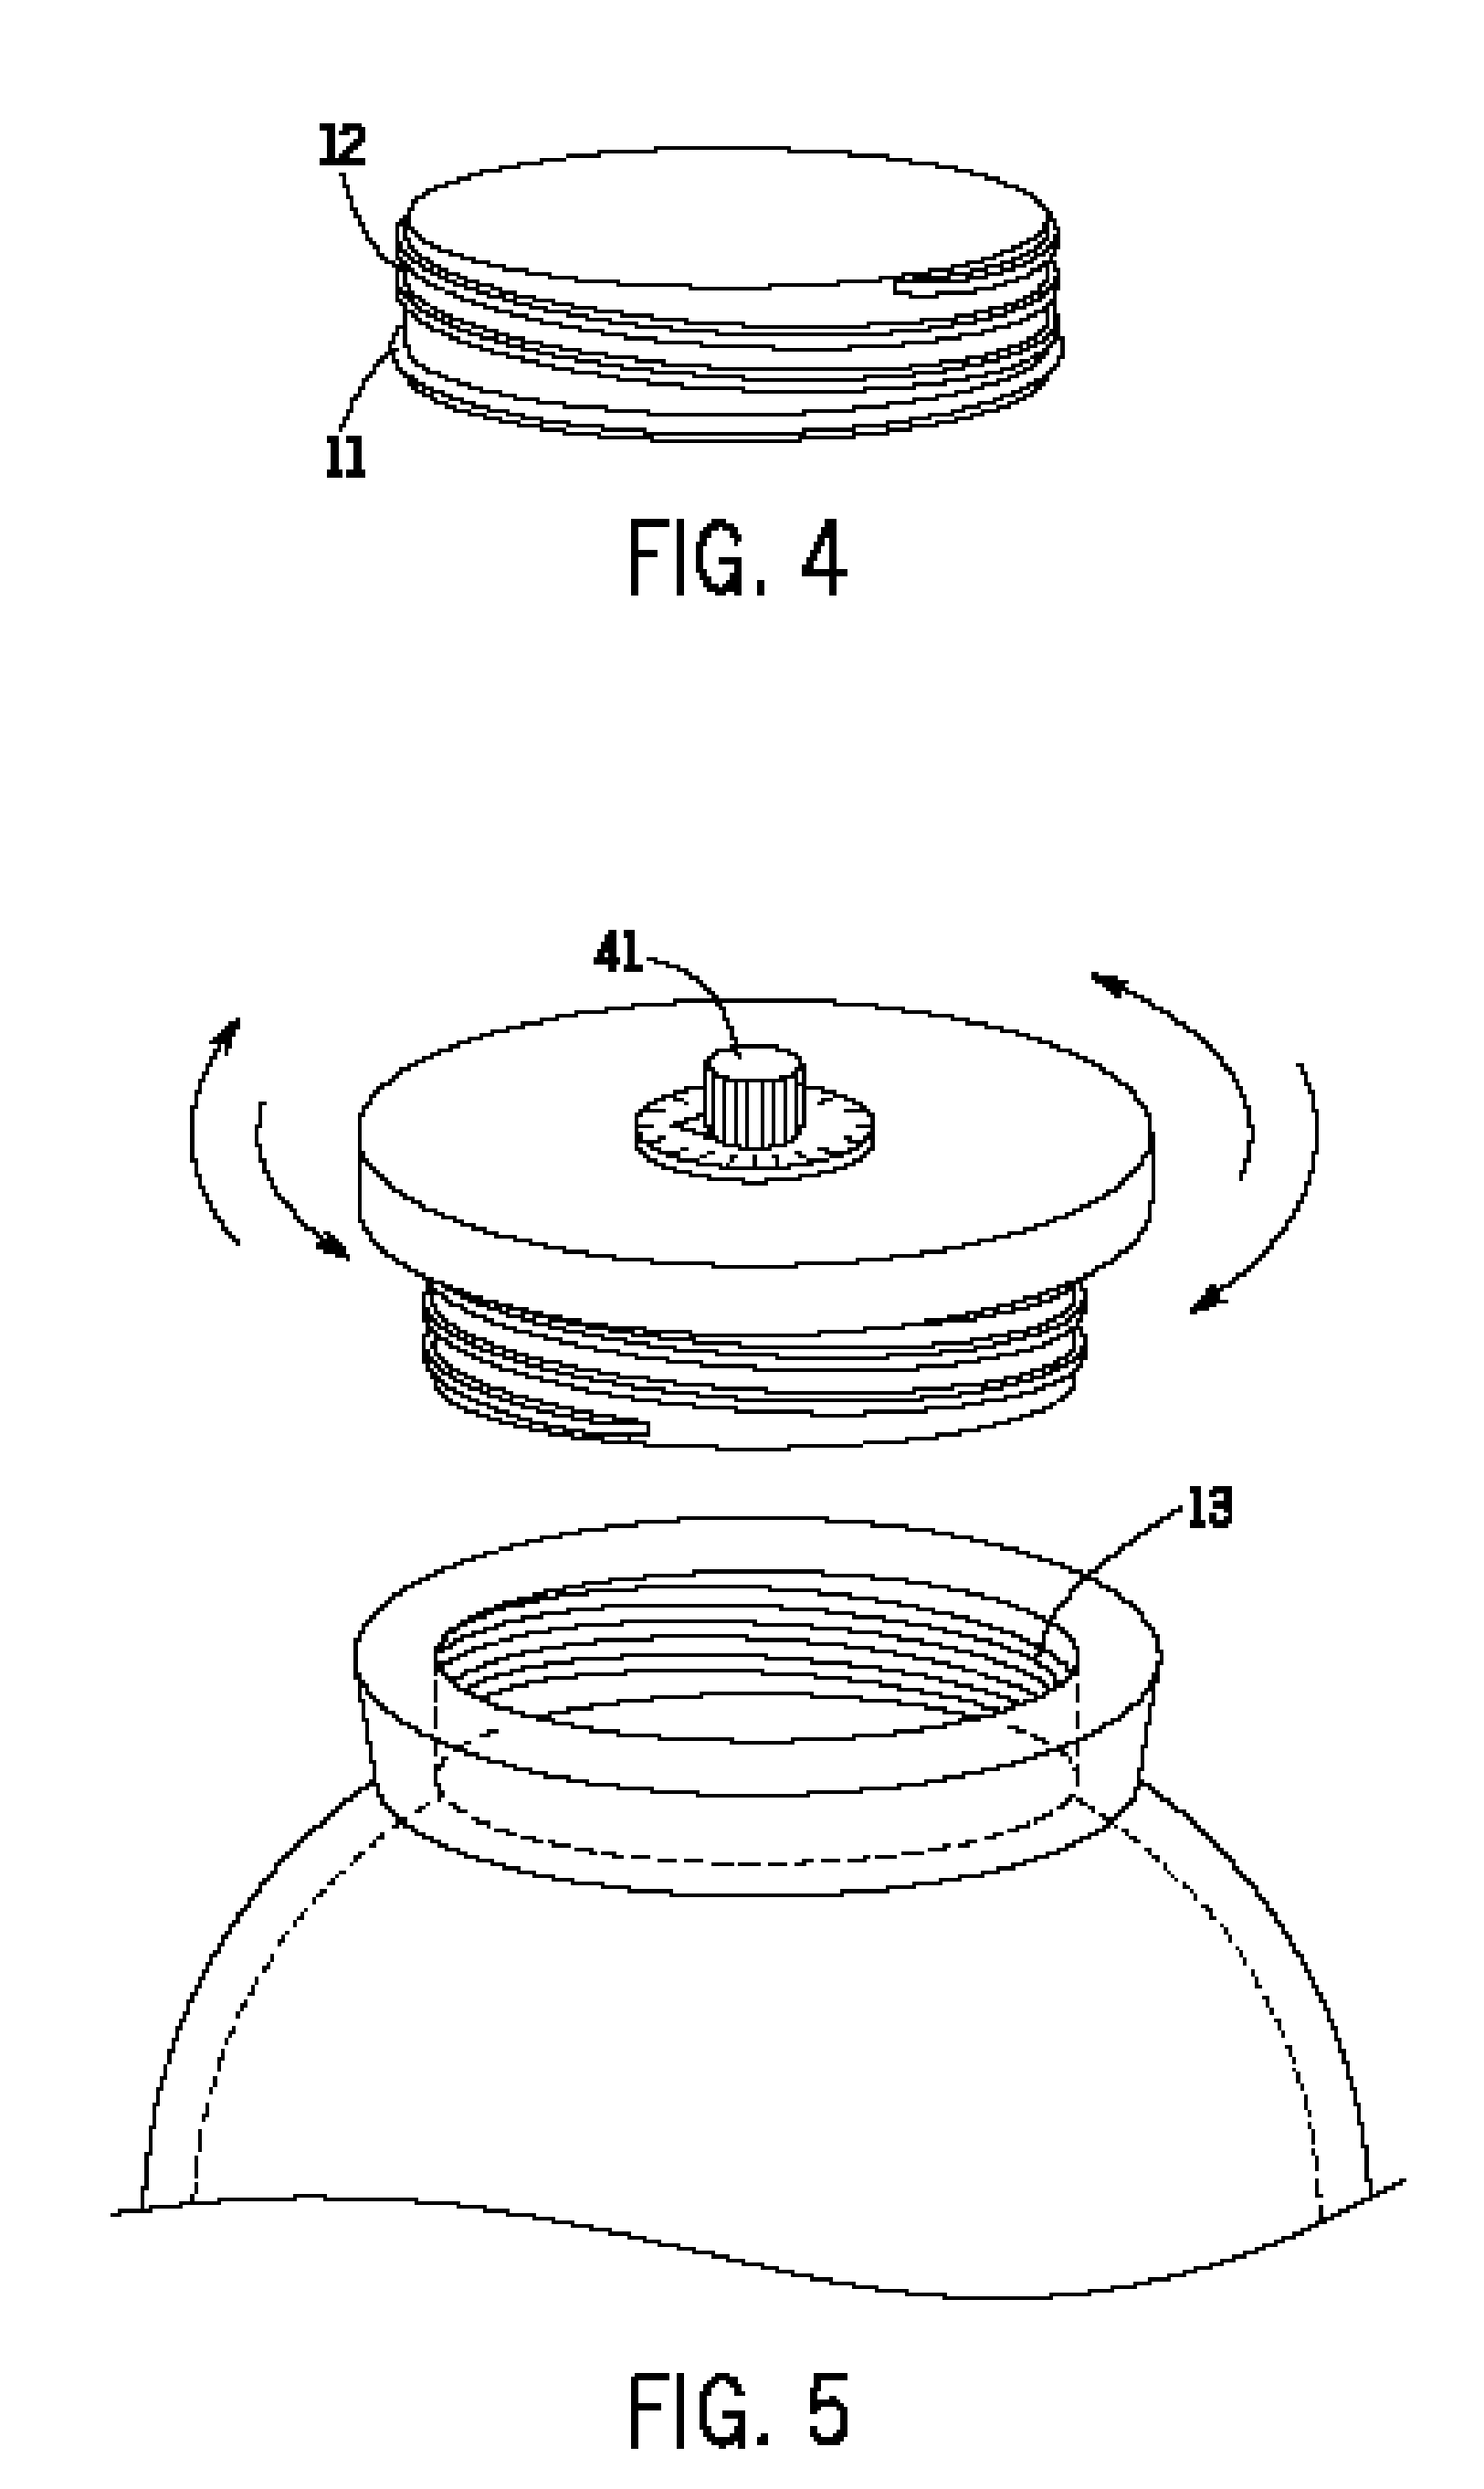 Urn with novel securing device